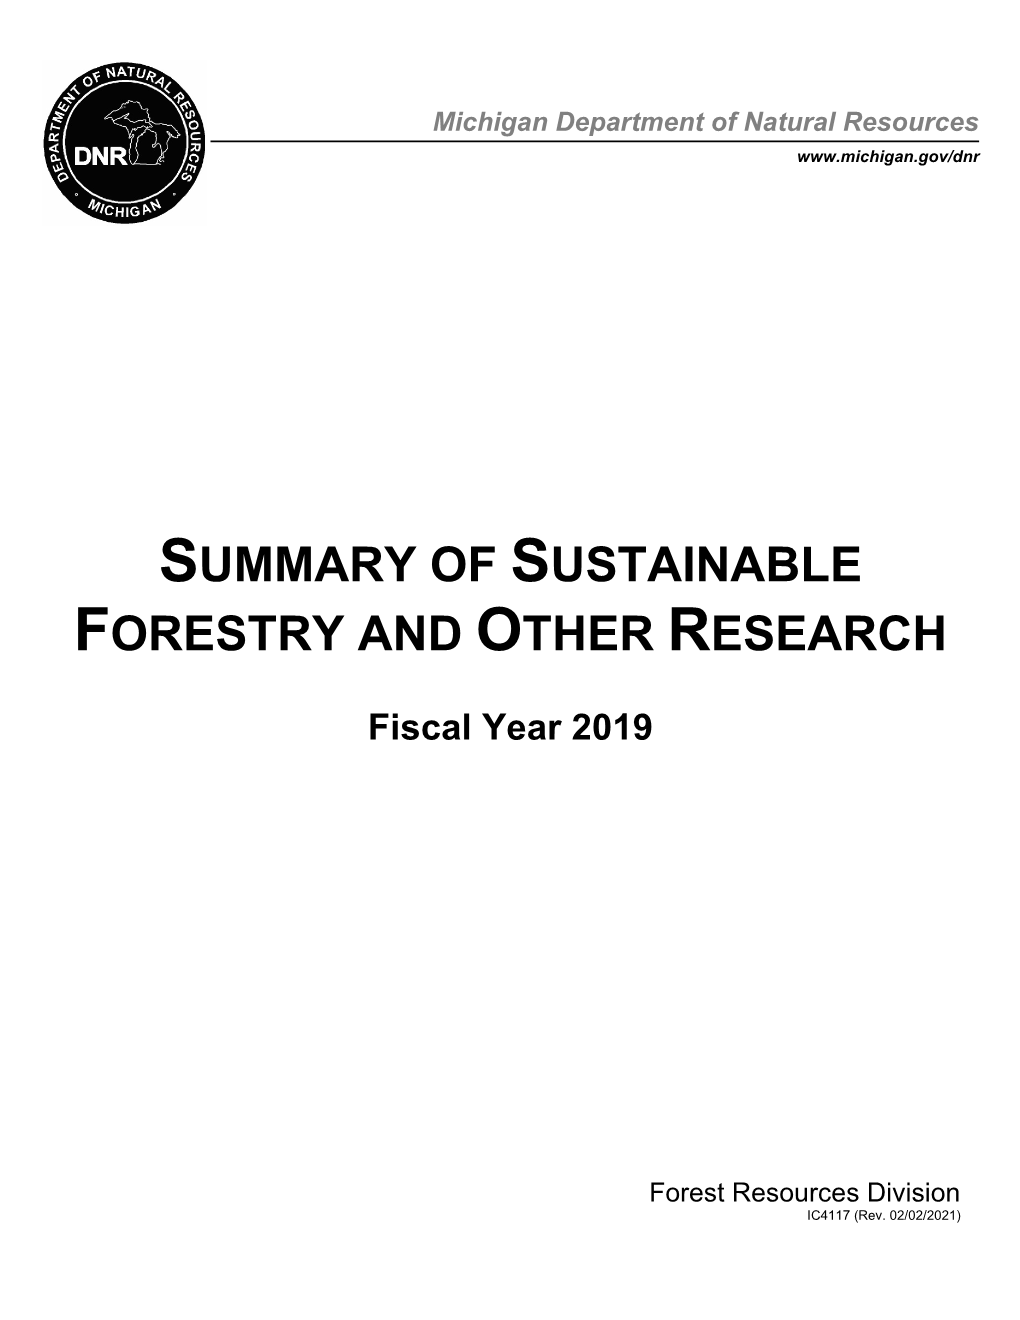 Sustainable Forestry Research